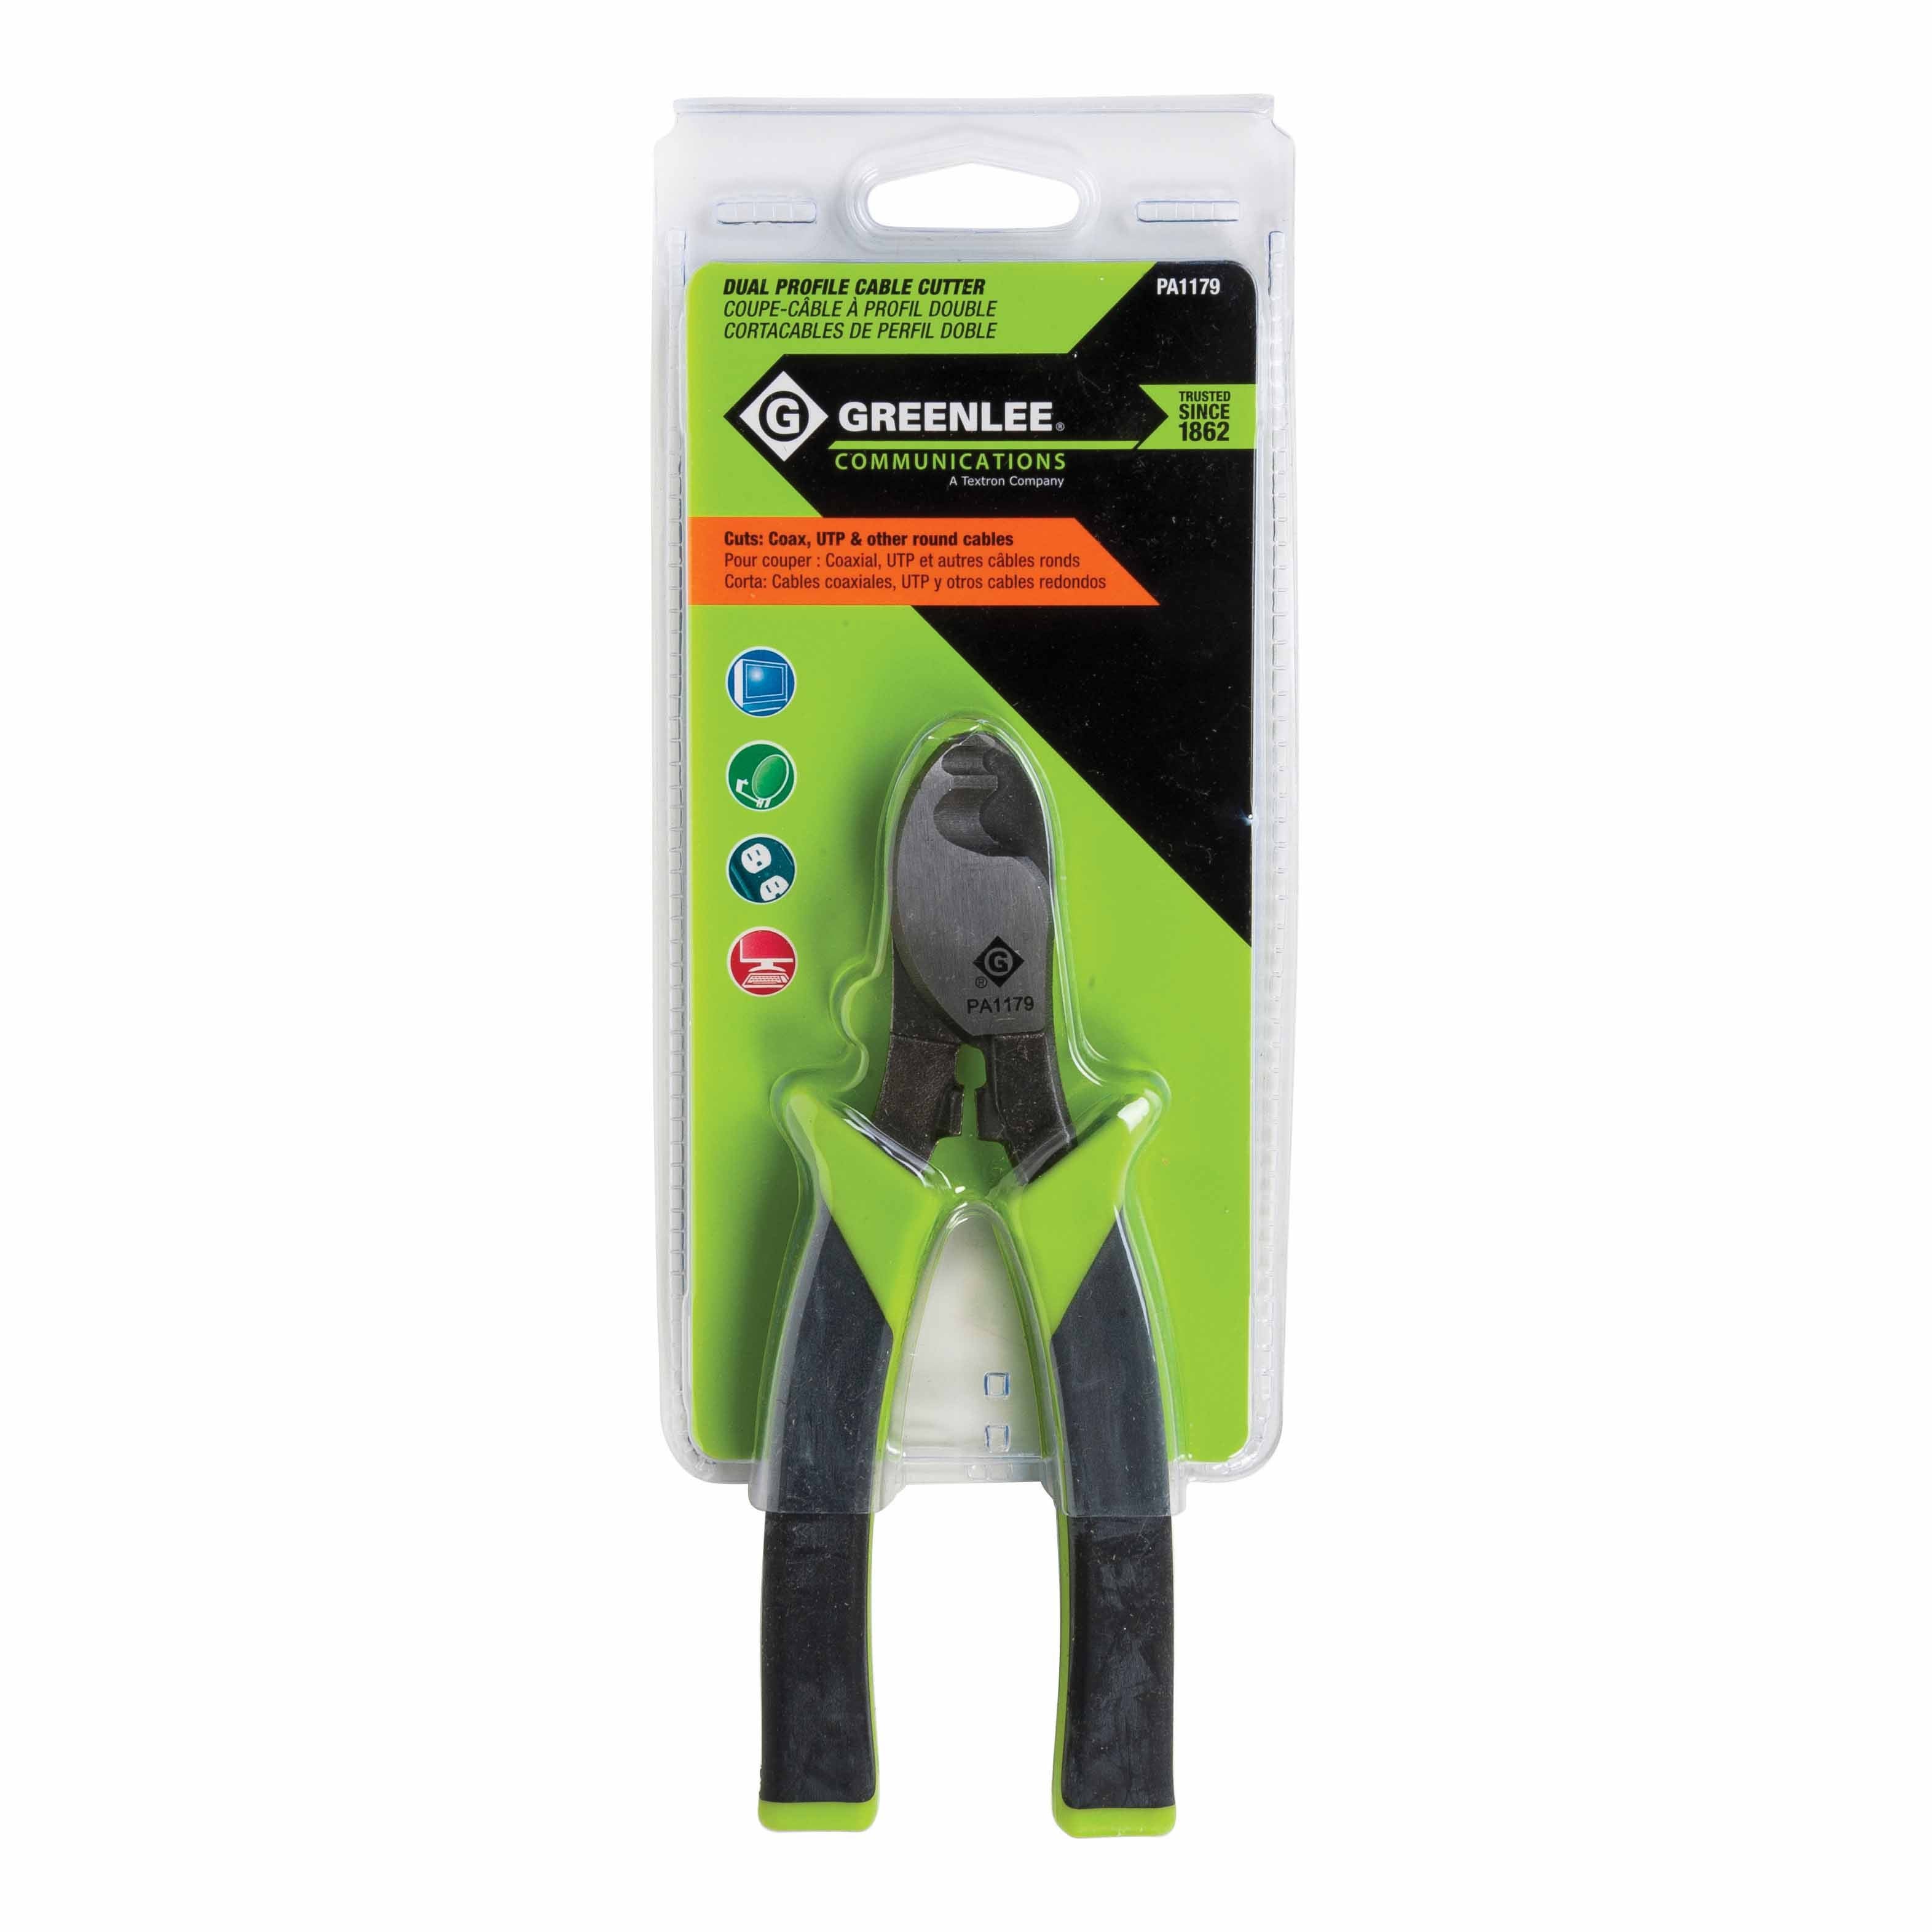 Greenlee PA1179 Pro-Grip Cutter, Dual Contour